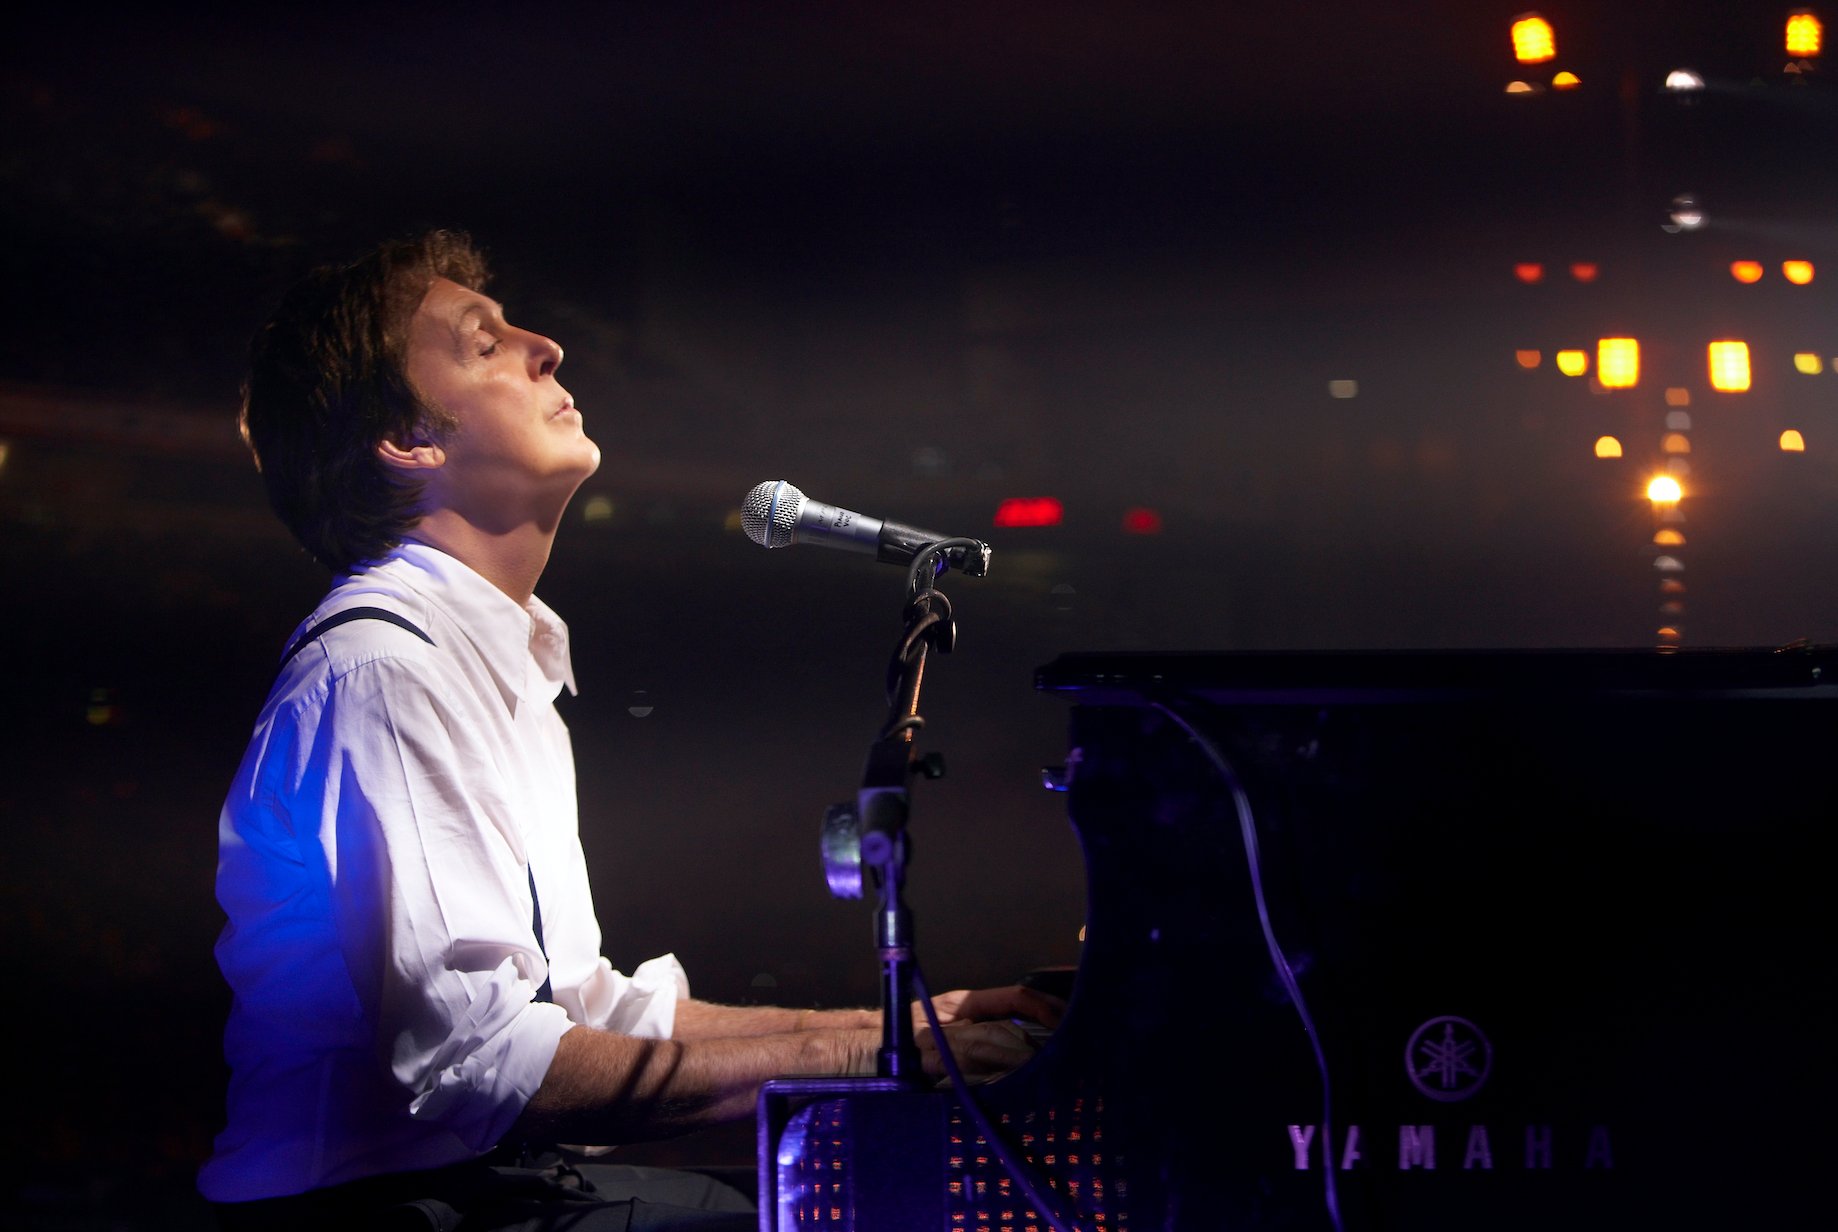 Paul McCartney plays the piano at the Liverpool Sound concert in 2008